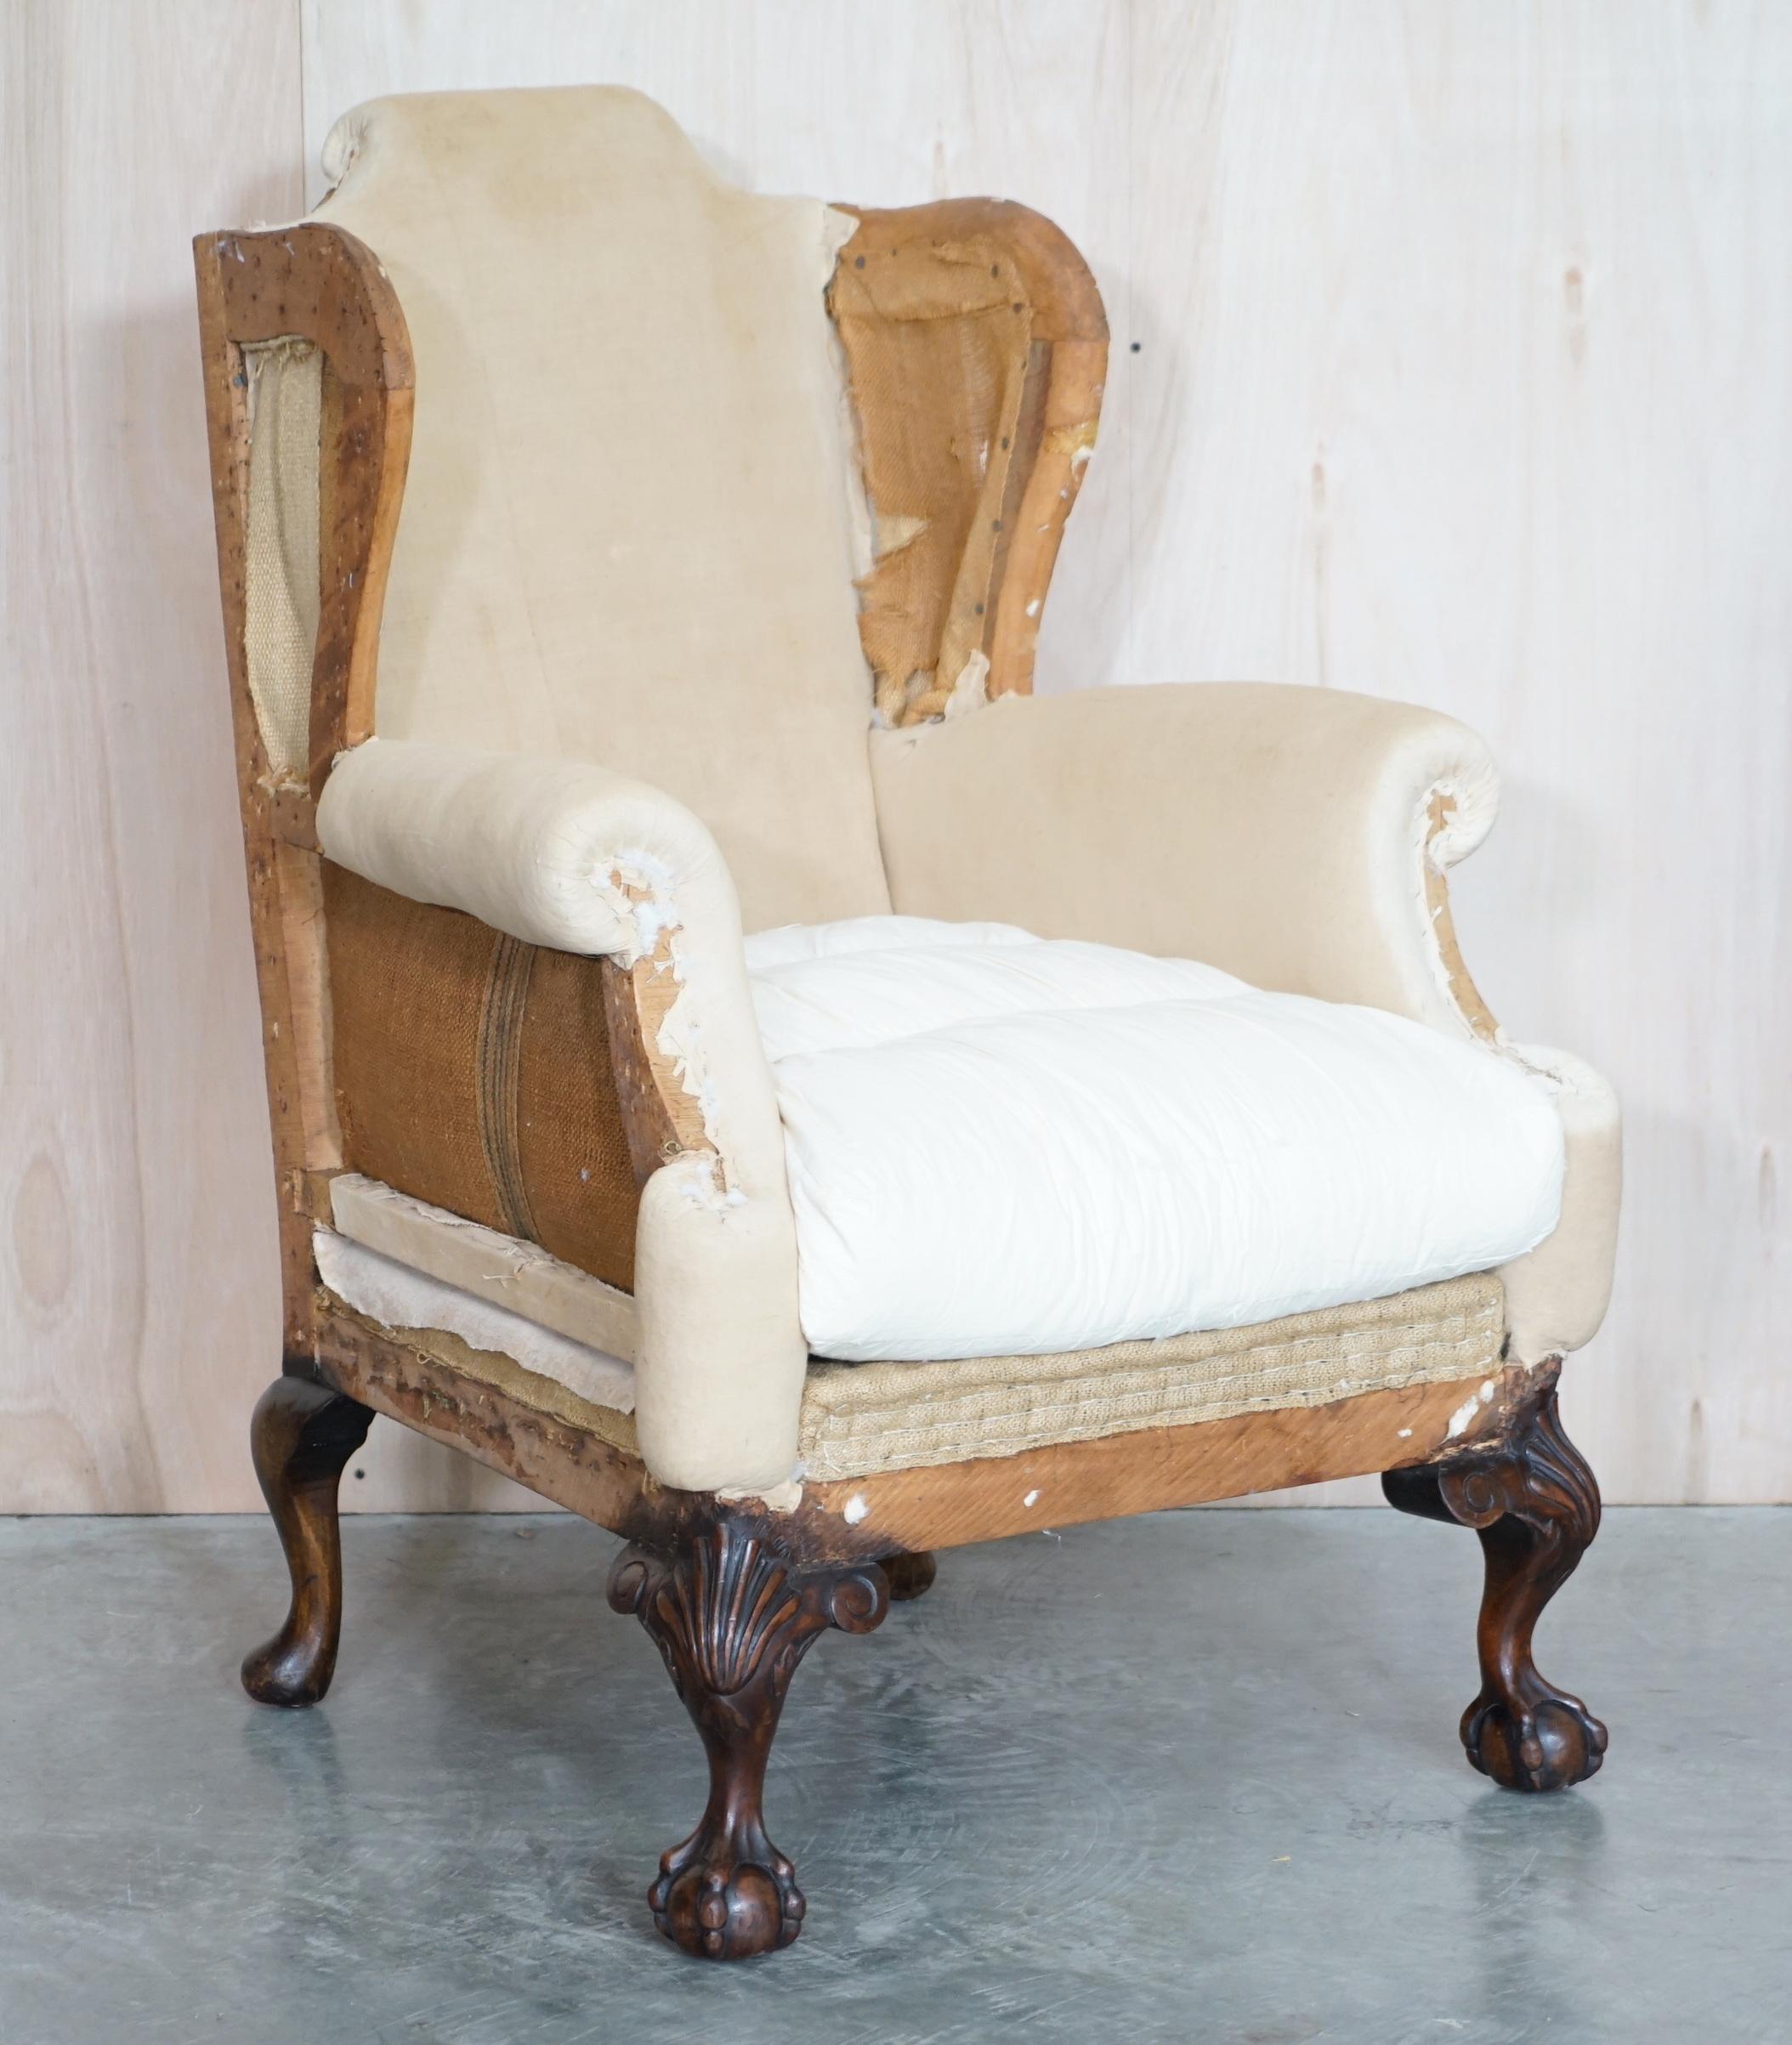 We are delighted to offer for sale this exquisite pair of Deconstructed Antique Victorian circa 1860 Wingback armchairs with ornately carved Georgian style Claw & Ball feet

This pair have been professionally stripped so they are ready for the new